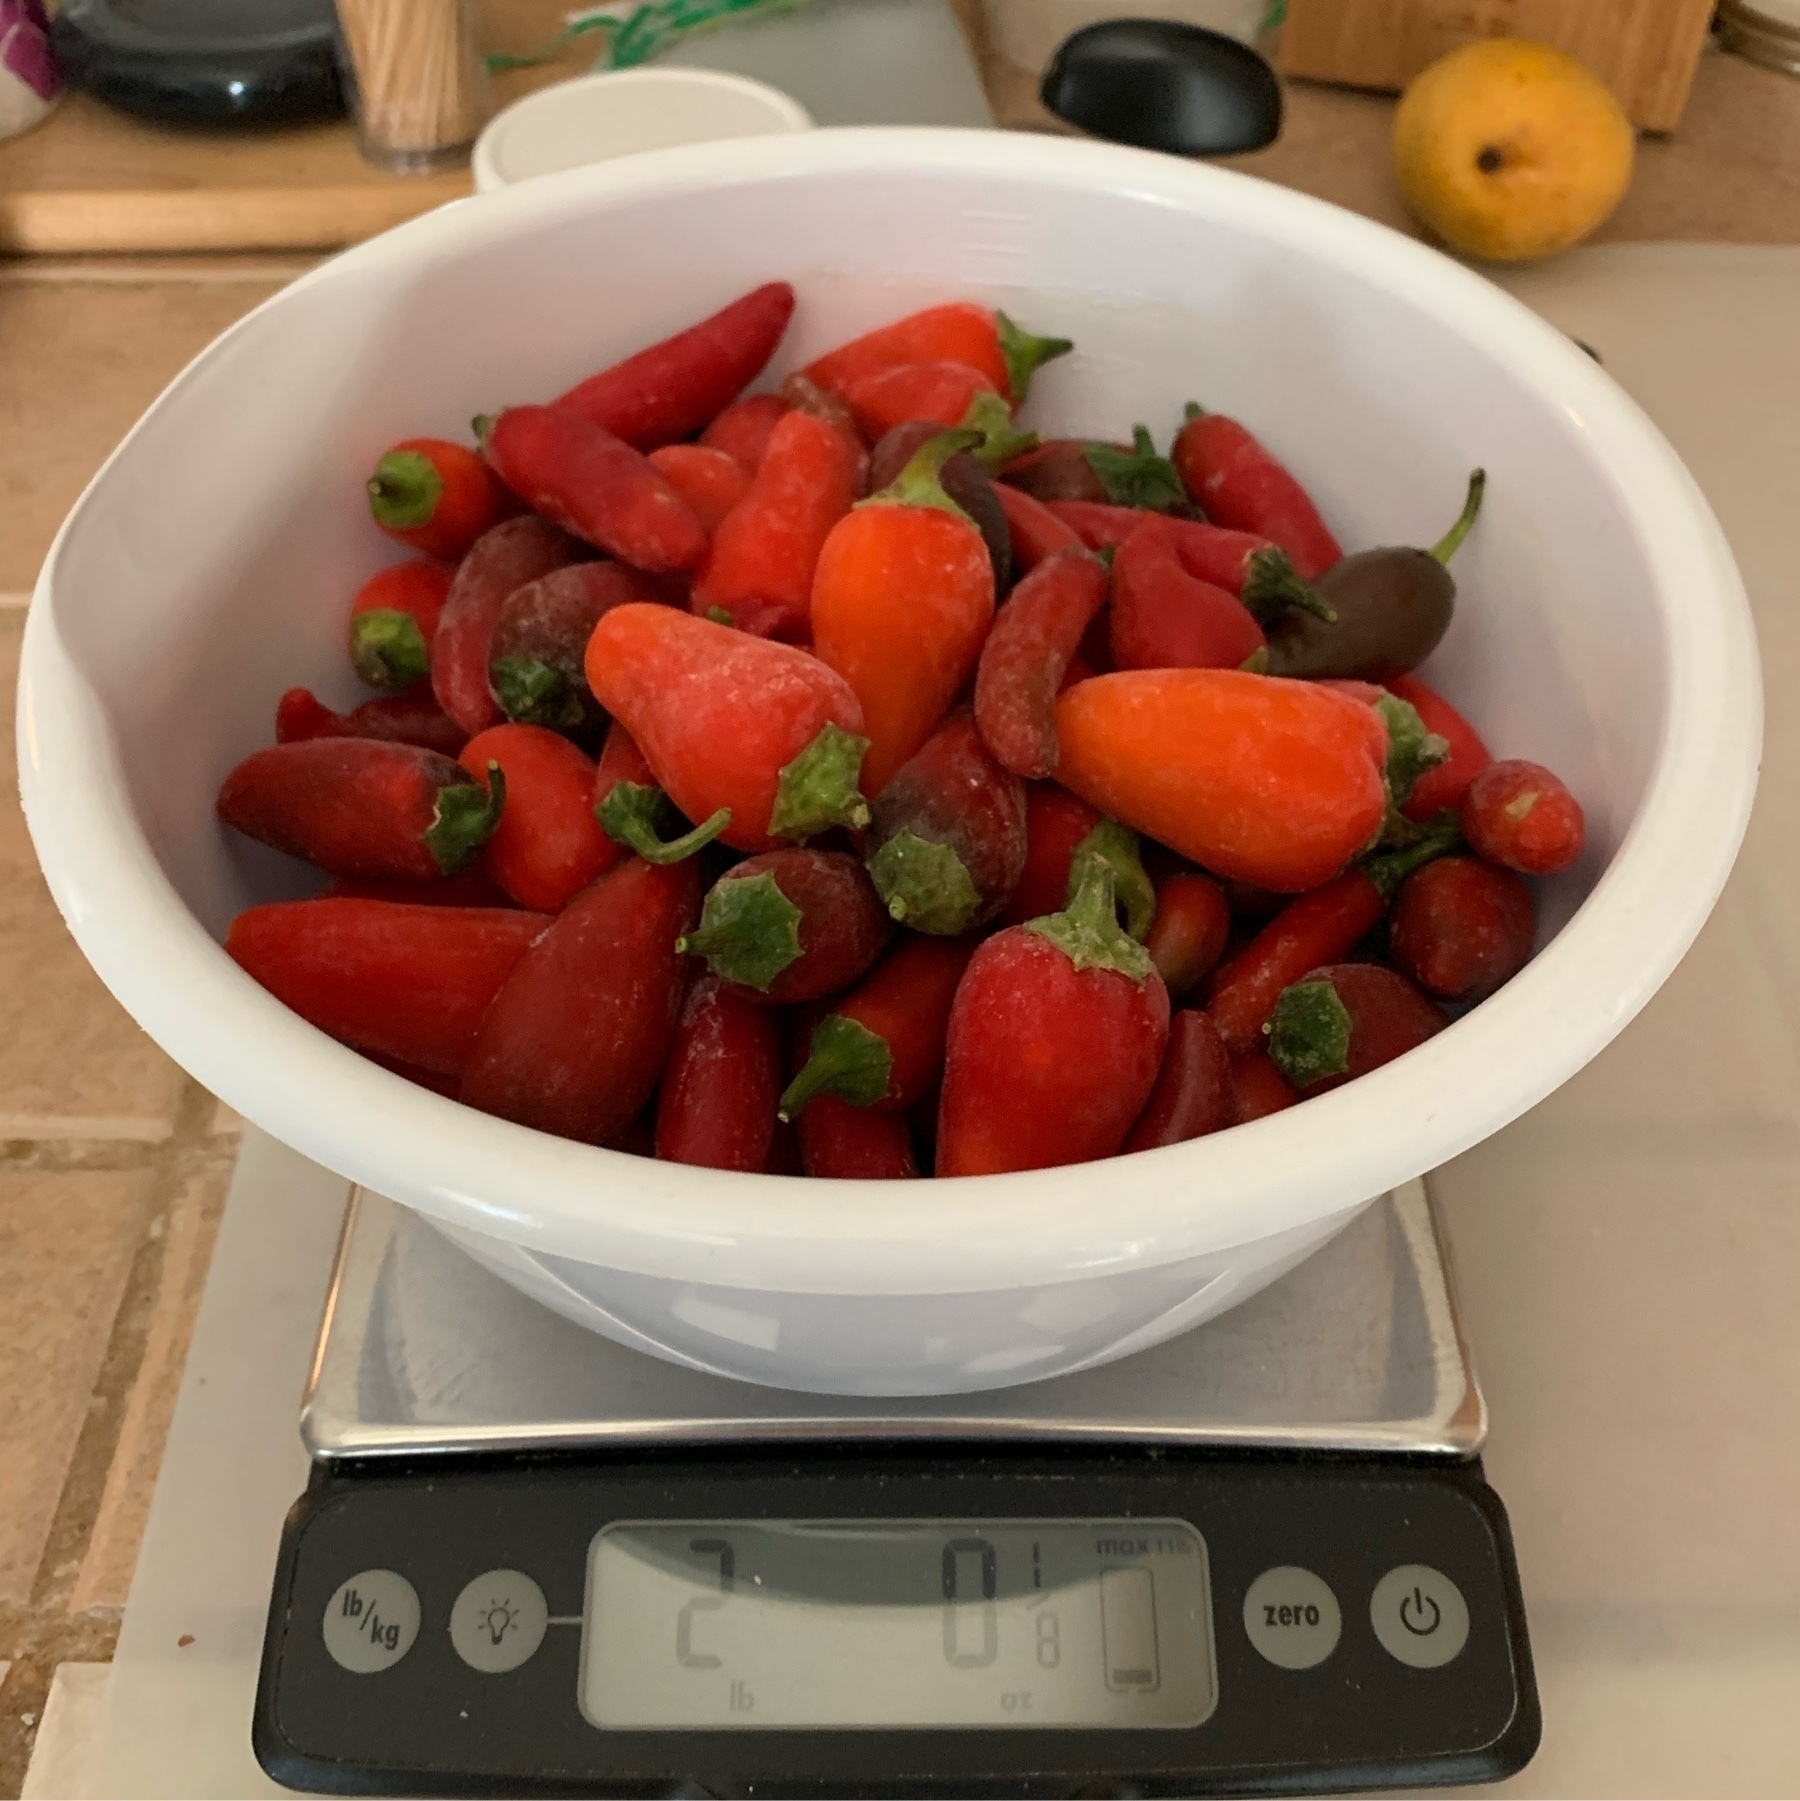 weighed peppers